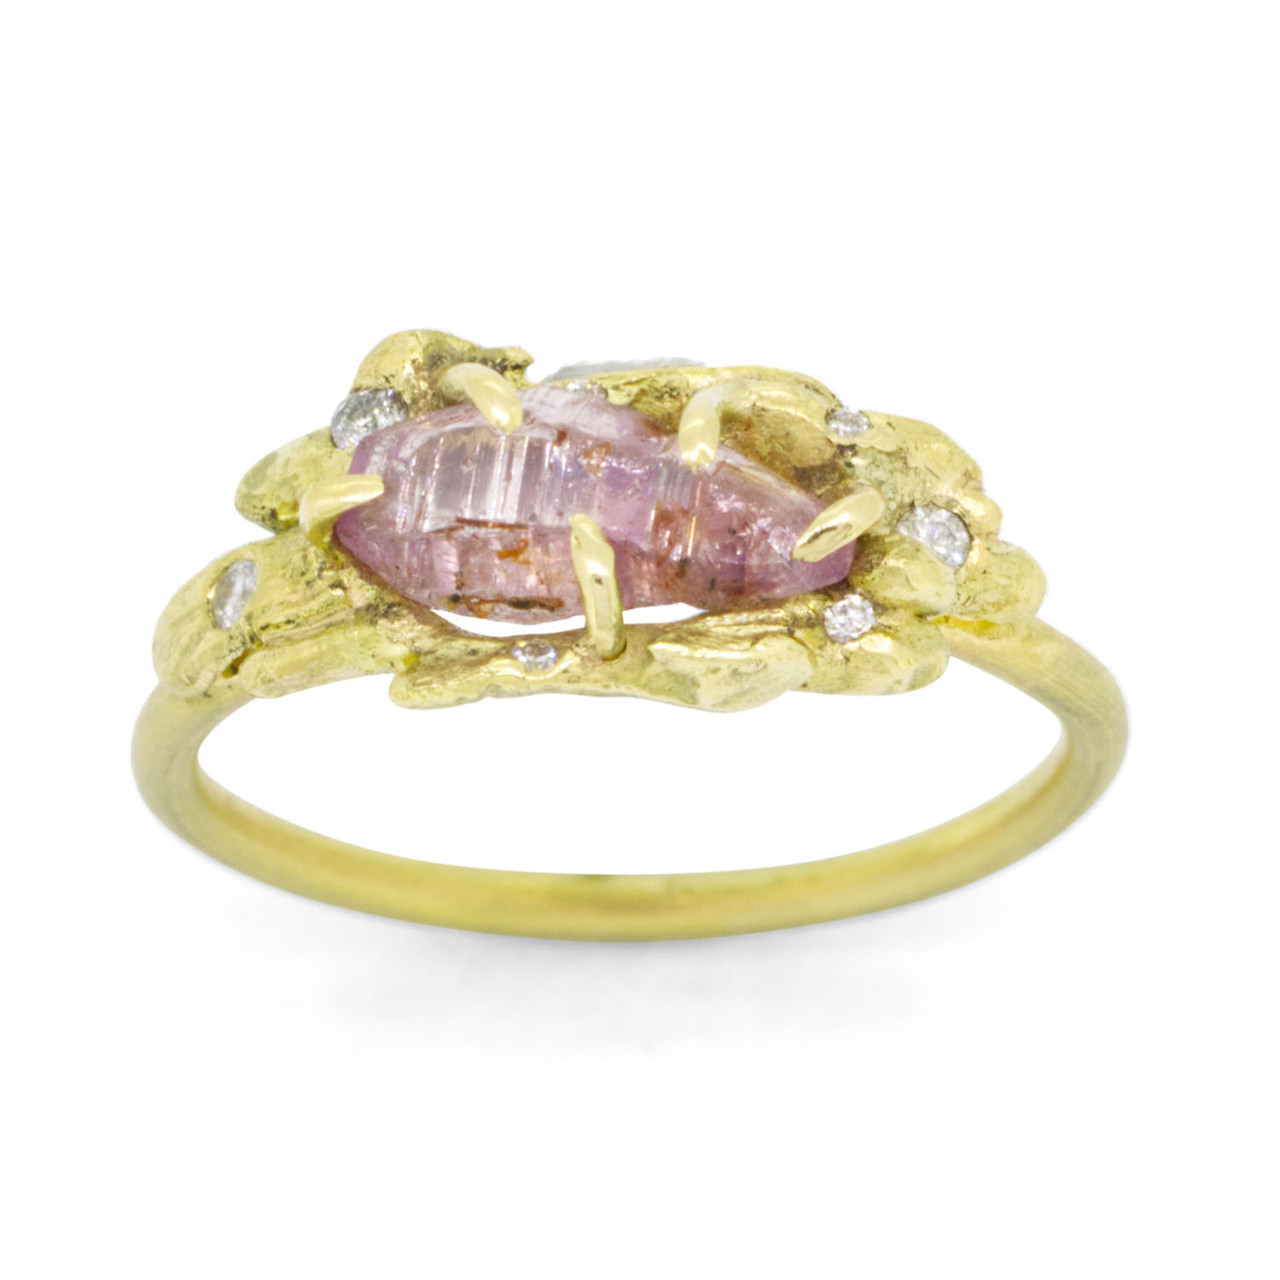 One-Of-A-Kind Pink Sapphire & Diamond Molten Ring, Laura Ngyou, tomfoolery